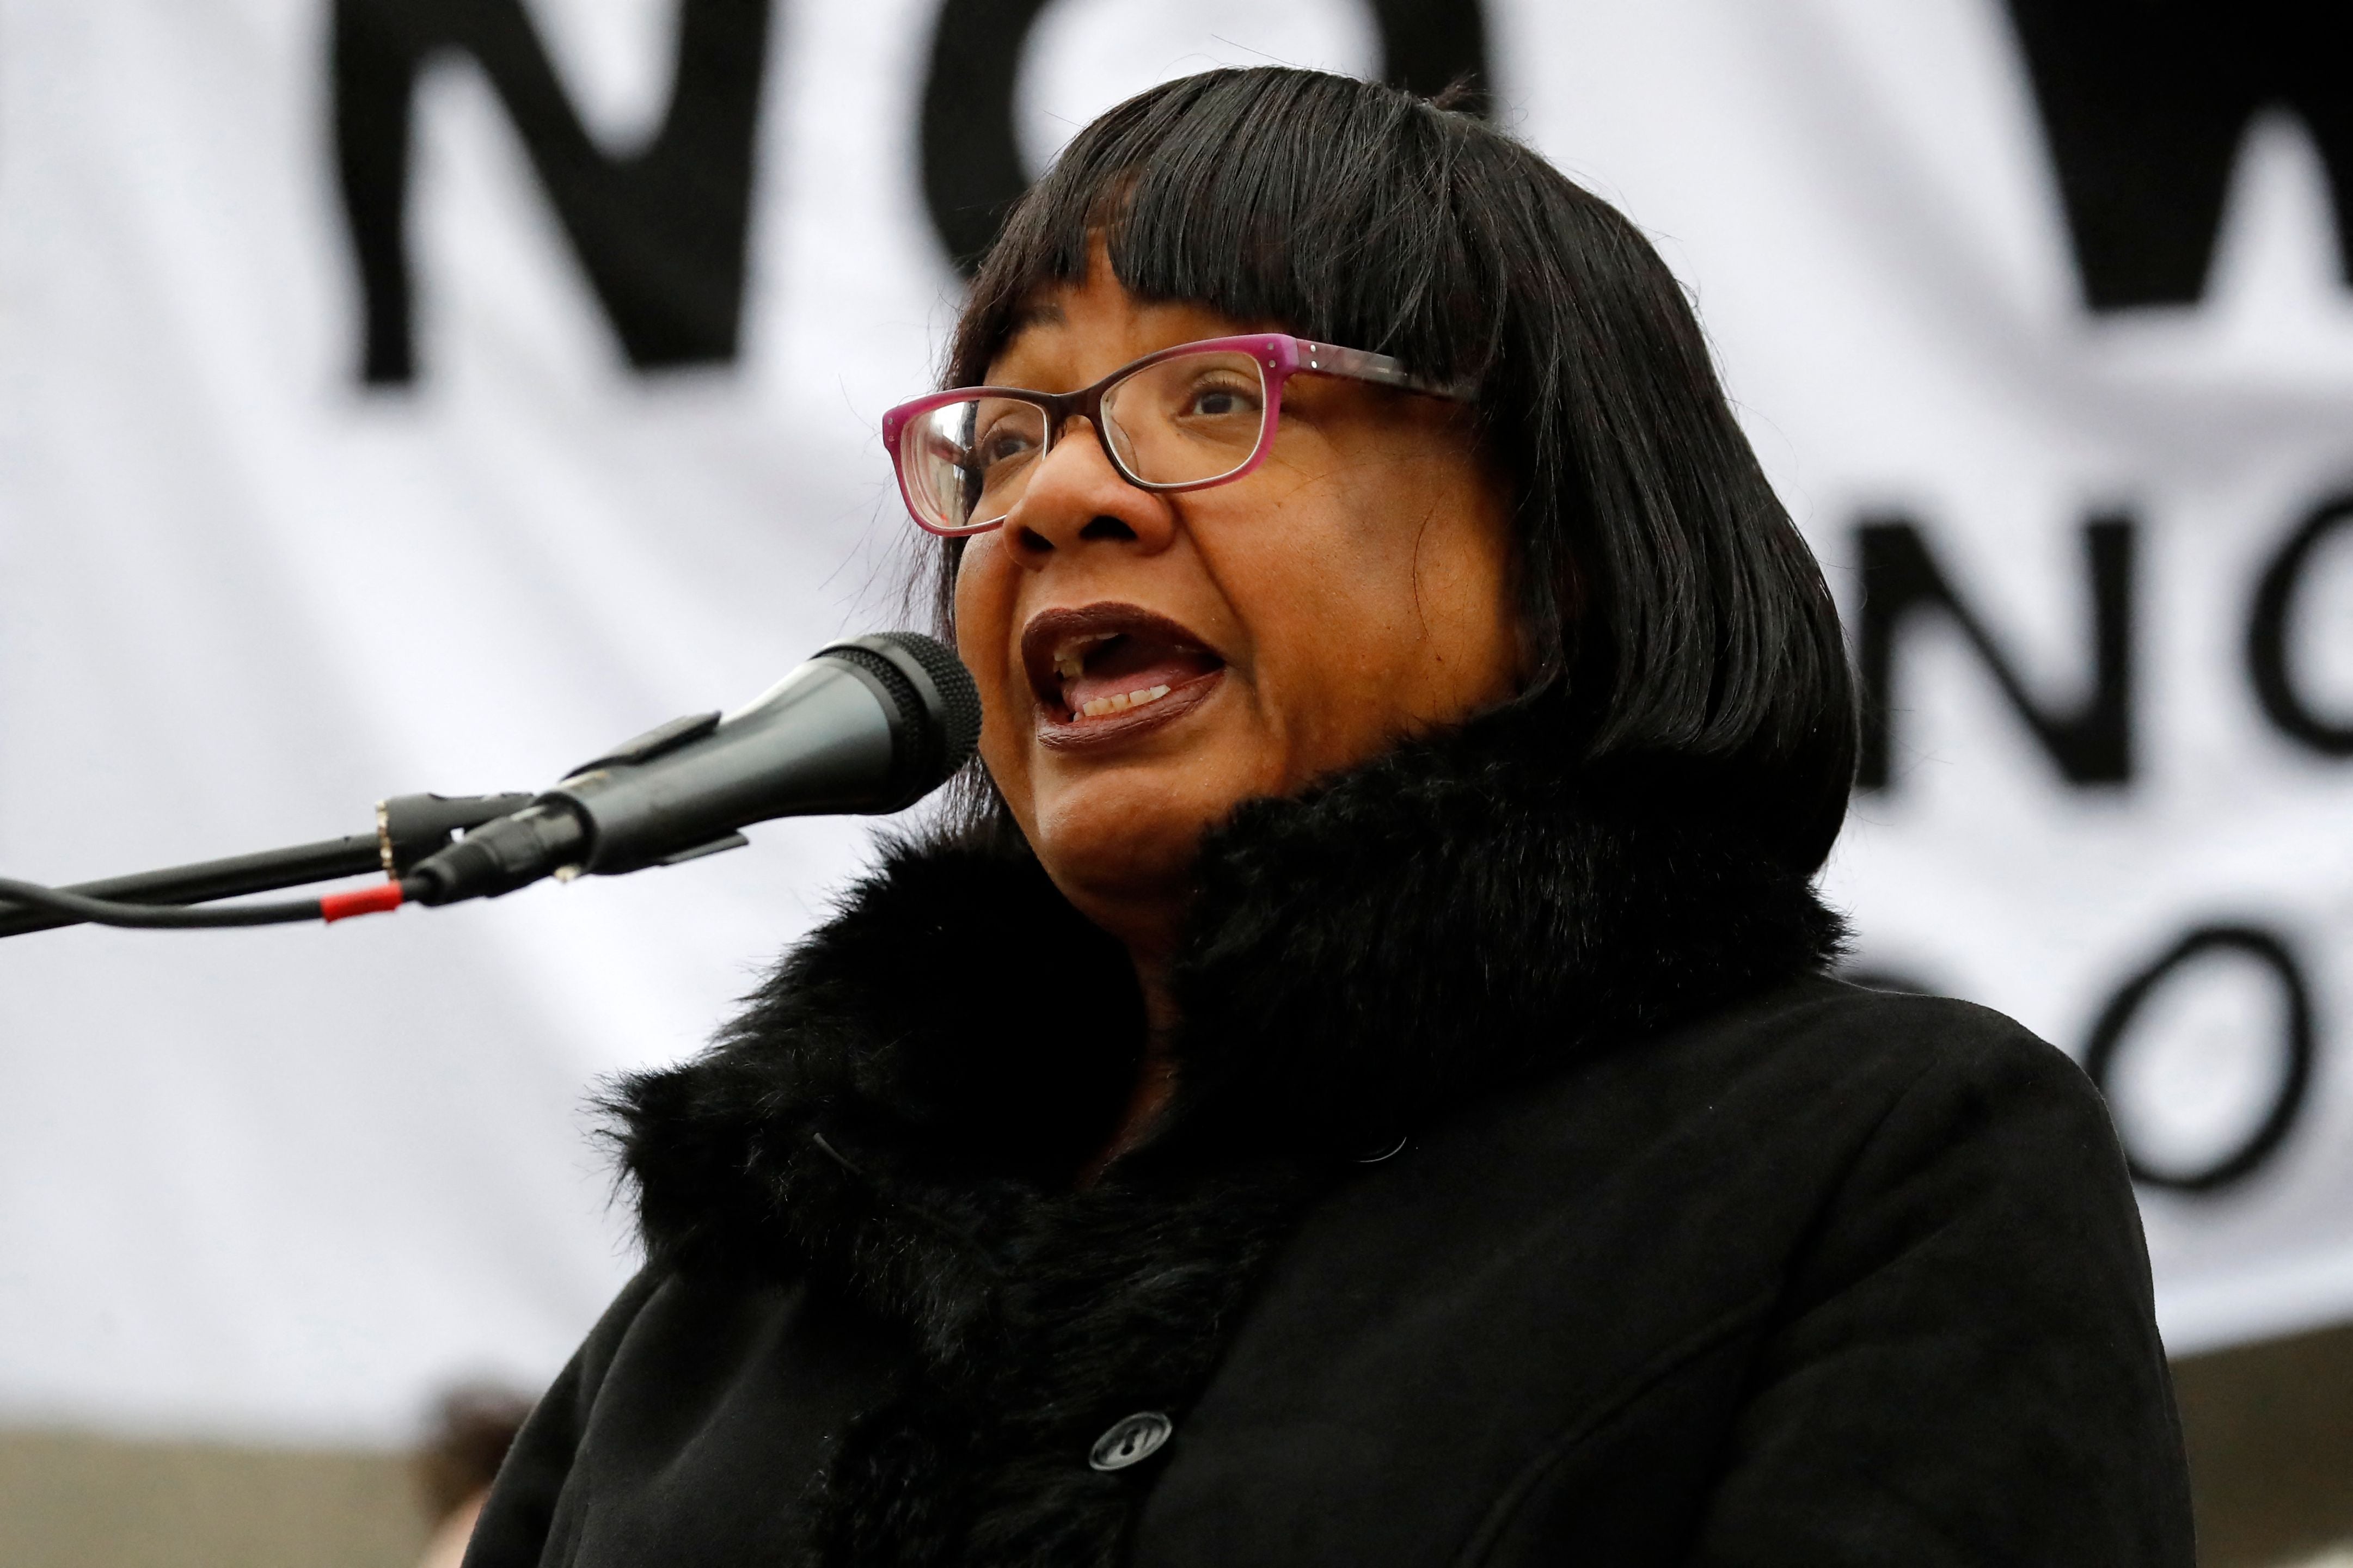 ƒDiane Abbot was the target of racist and misogynistic comments from Hester, who has made many millions from supplying the NHS with software